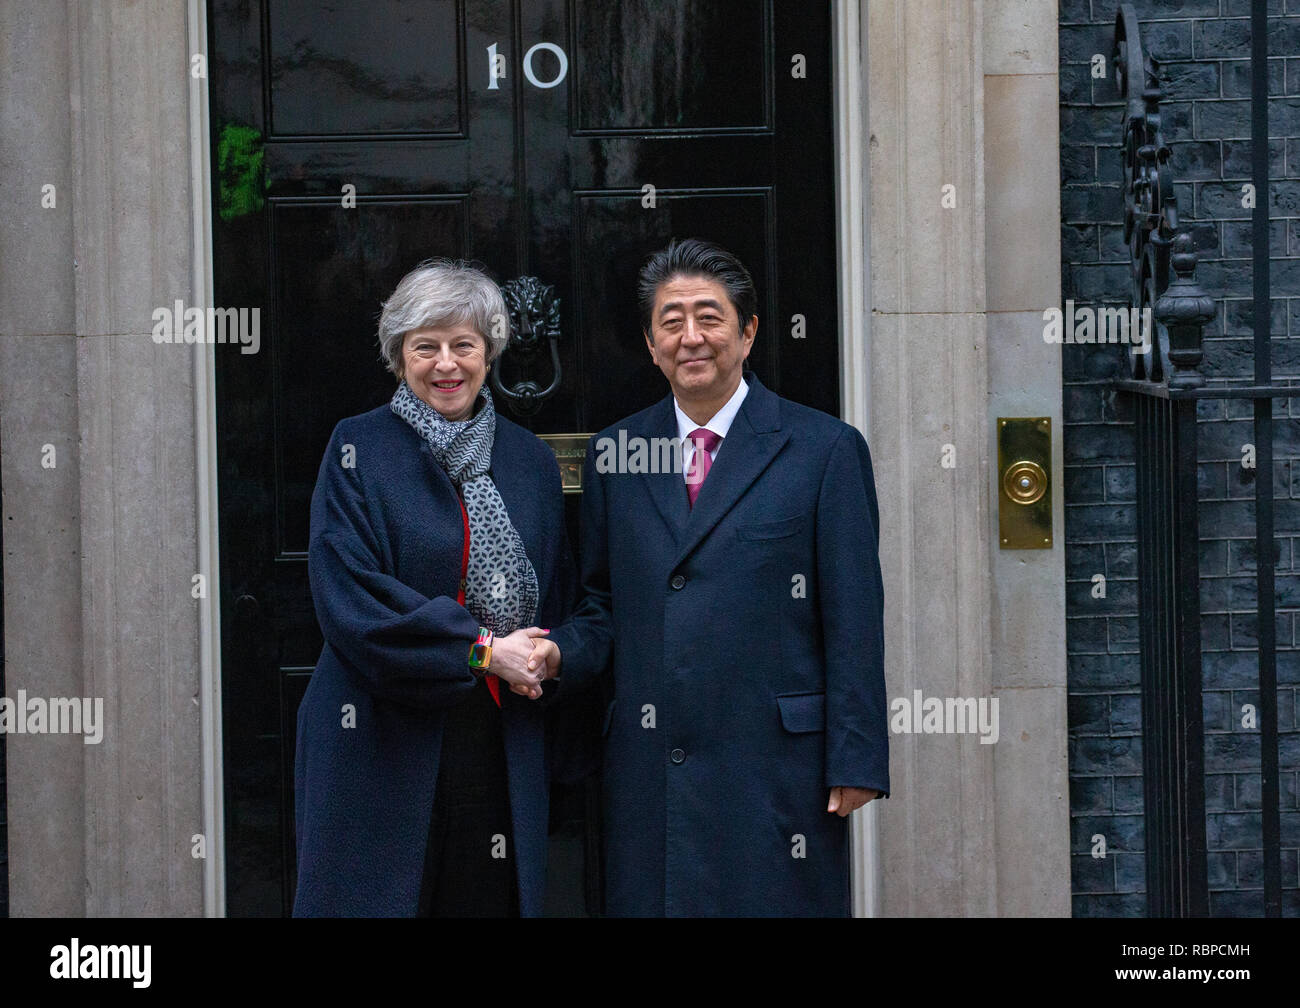 Theresa May, British Prime Minister, meets Shinzo Abe, the Prime Minister of Japan, for talks at 10 Downing Street. Stock Photo